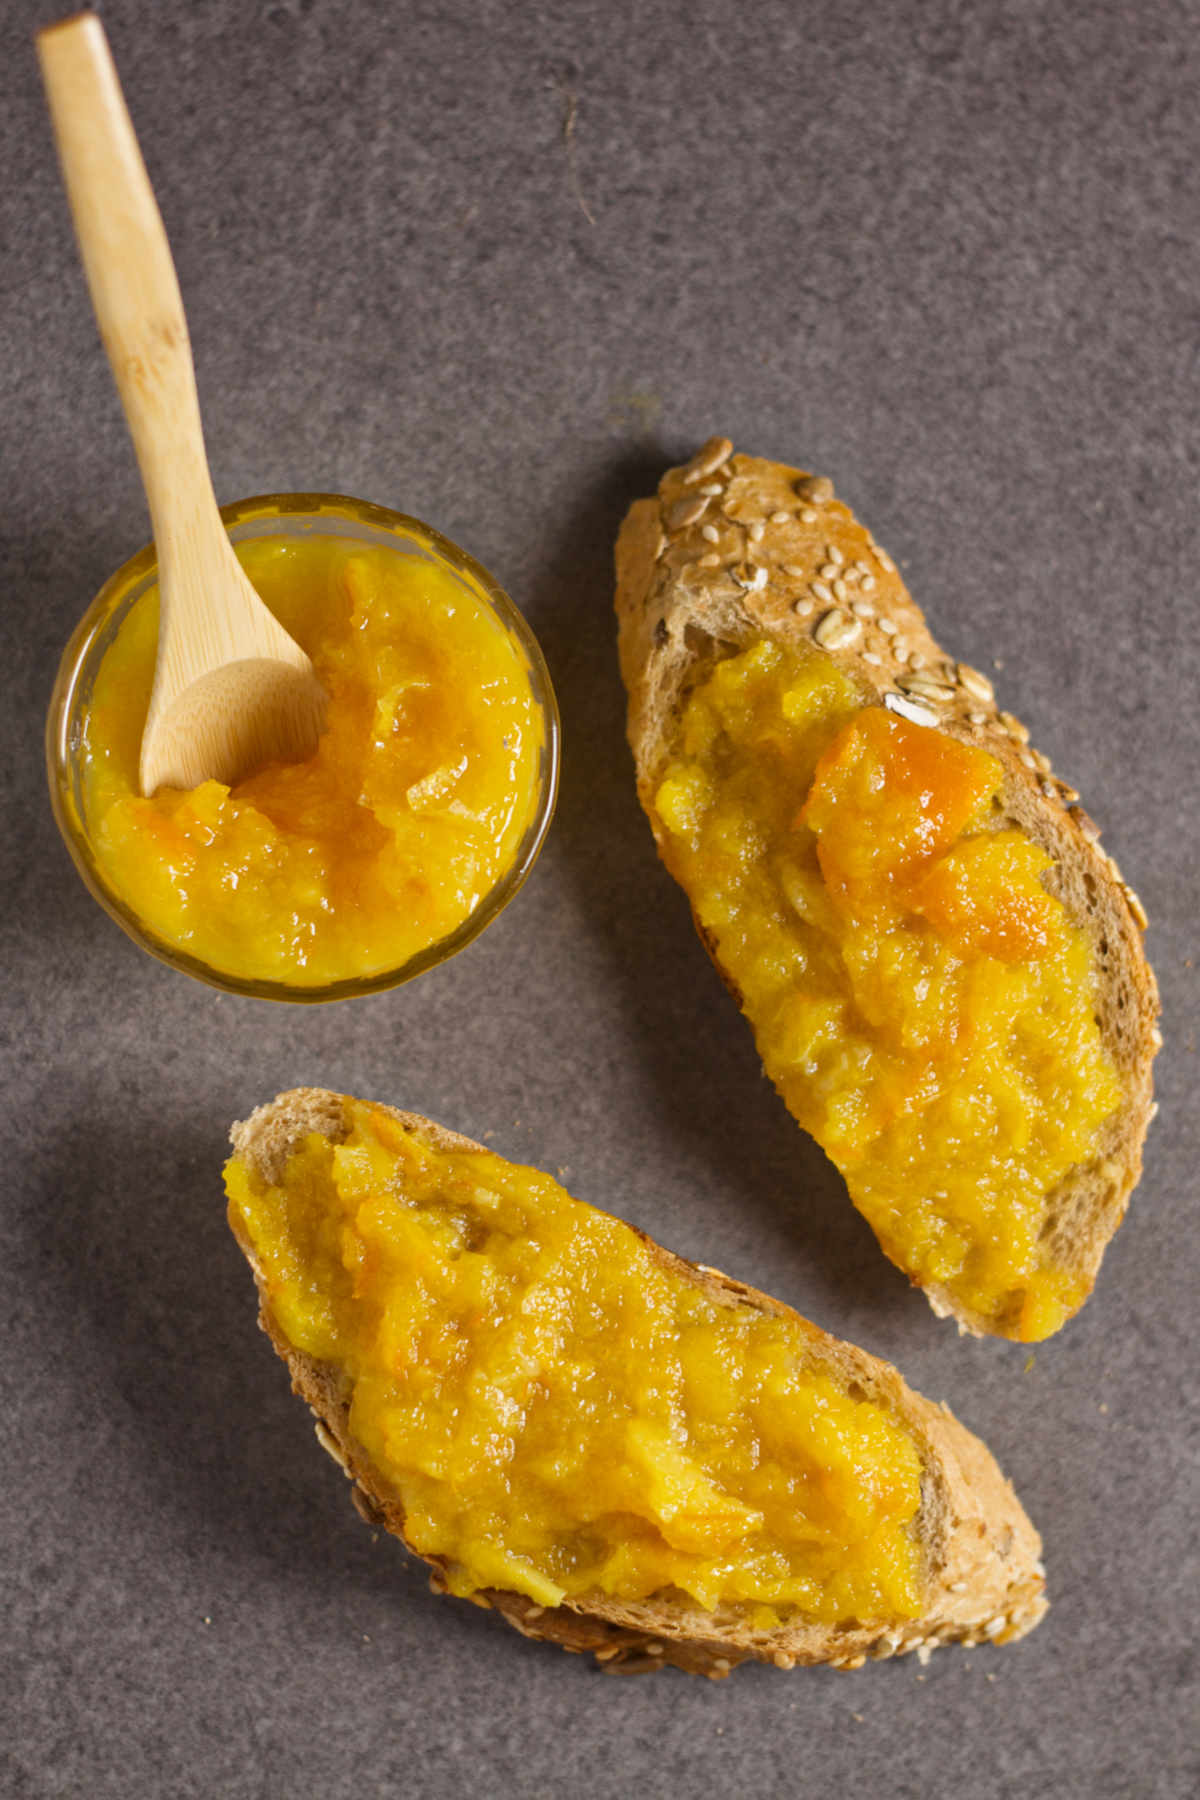 Two slices of integral bread with orange marmalade, and a bowl with orange marmalade and a wooden spoon on a gray background.